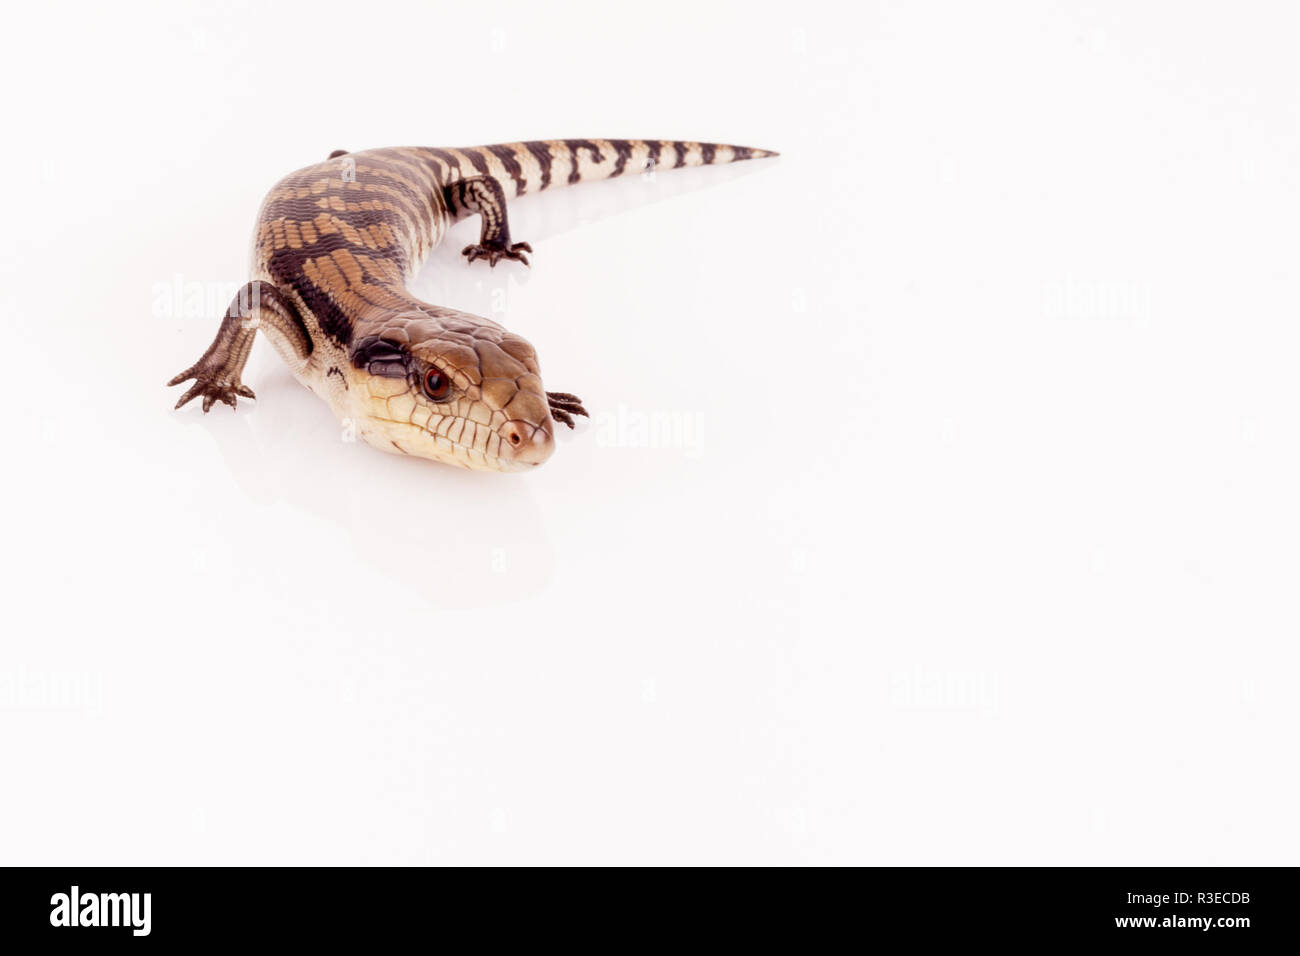 Australian Baby Eastern Blue Tongue Lizard closeup walking on reflective white perspex base isolated against white background in landscape format Stock Photo